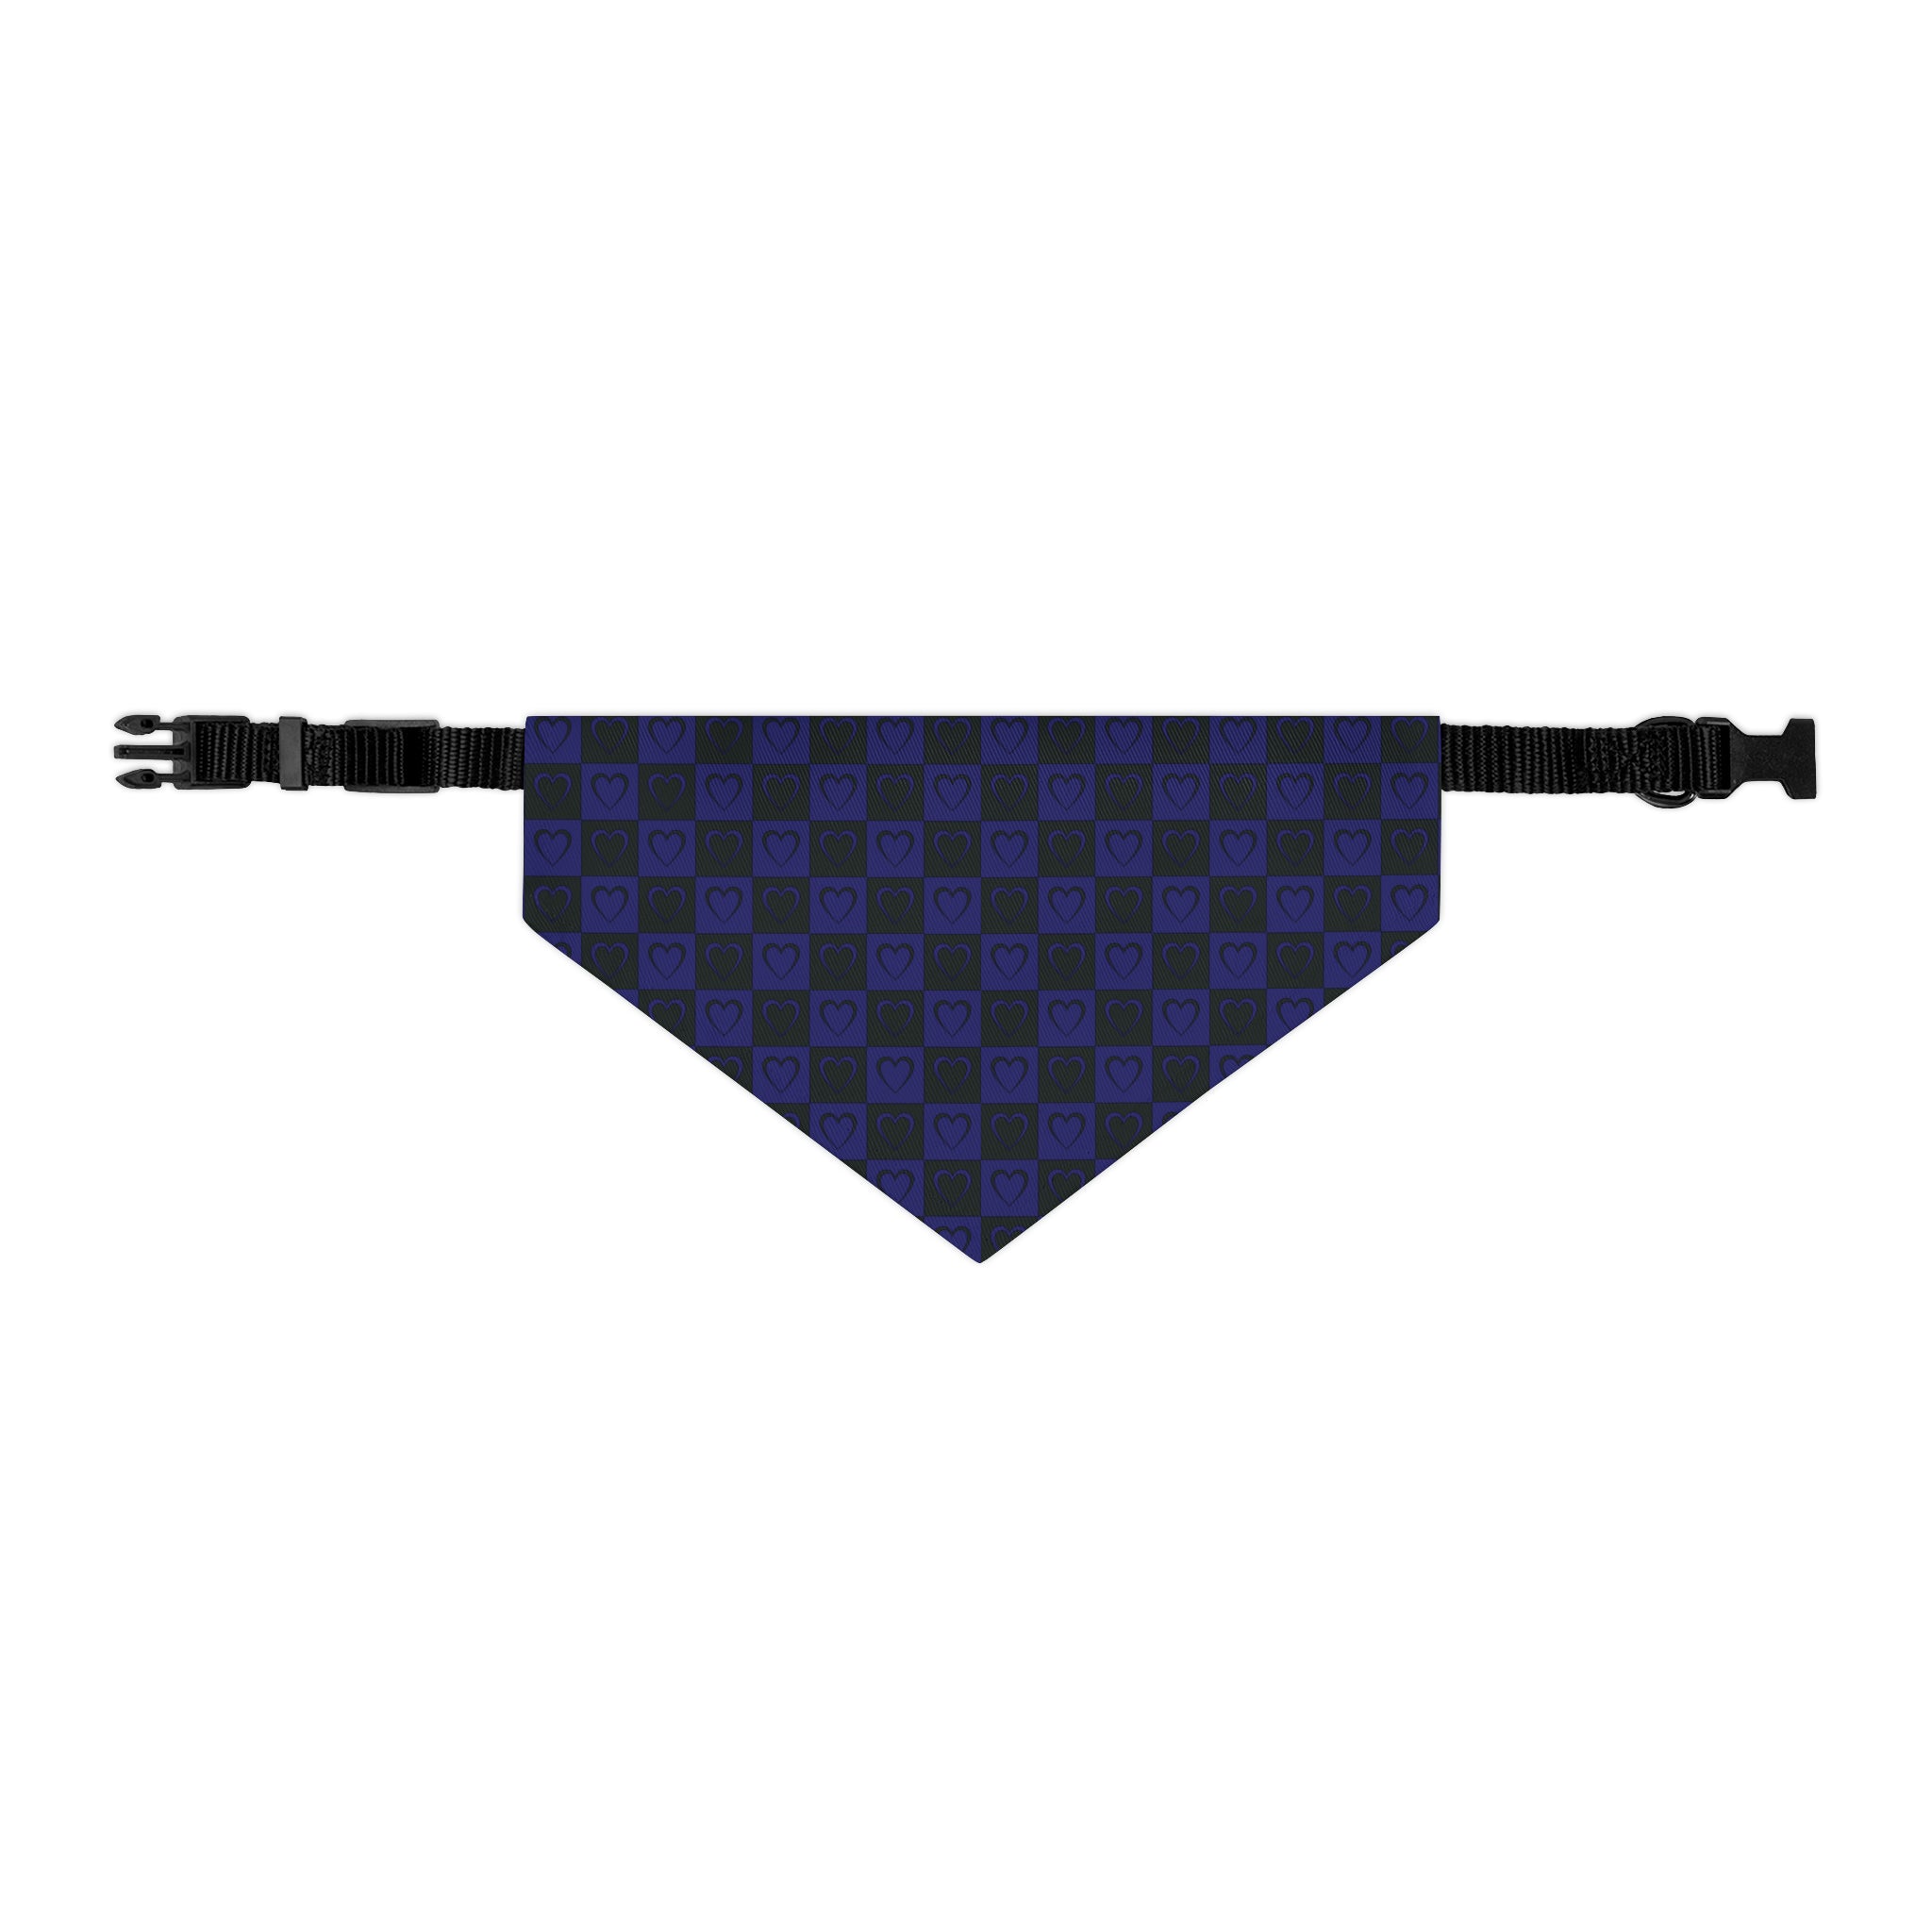 Baltimore Football Pet Bandana | Comes in Different Sizes for Different Breeds | Free Shipping